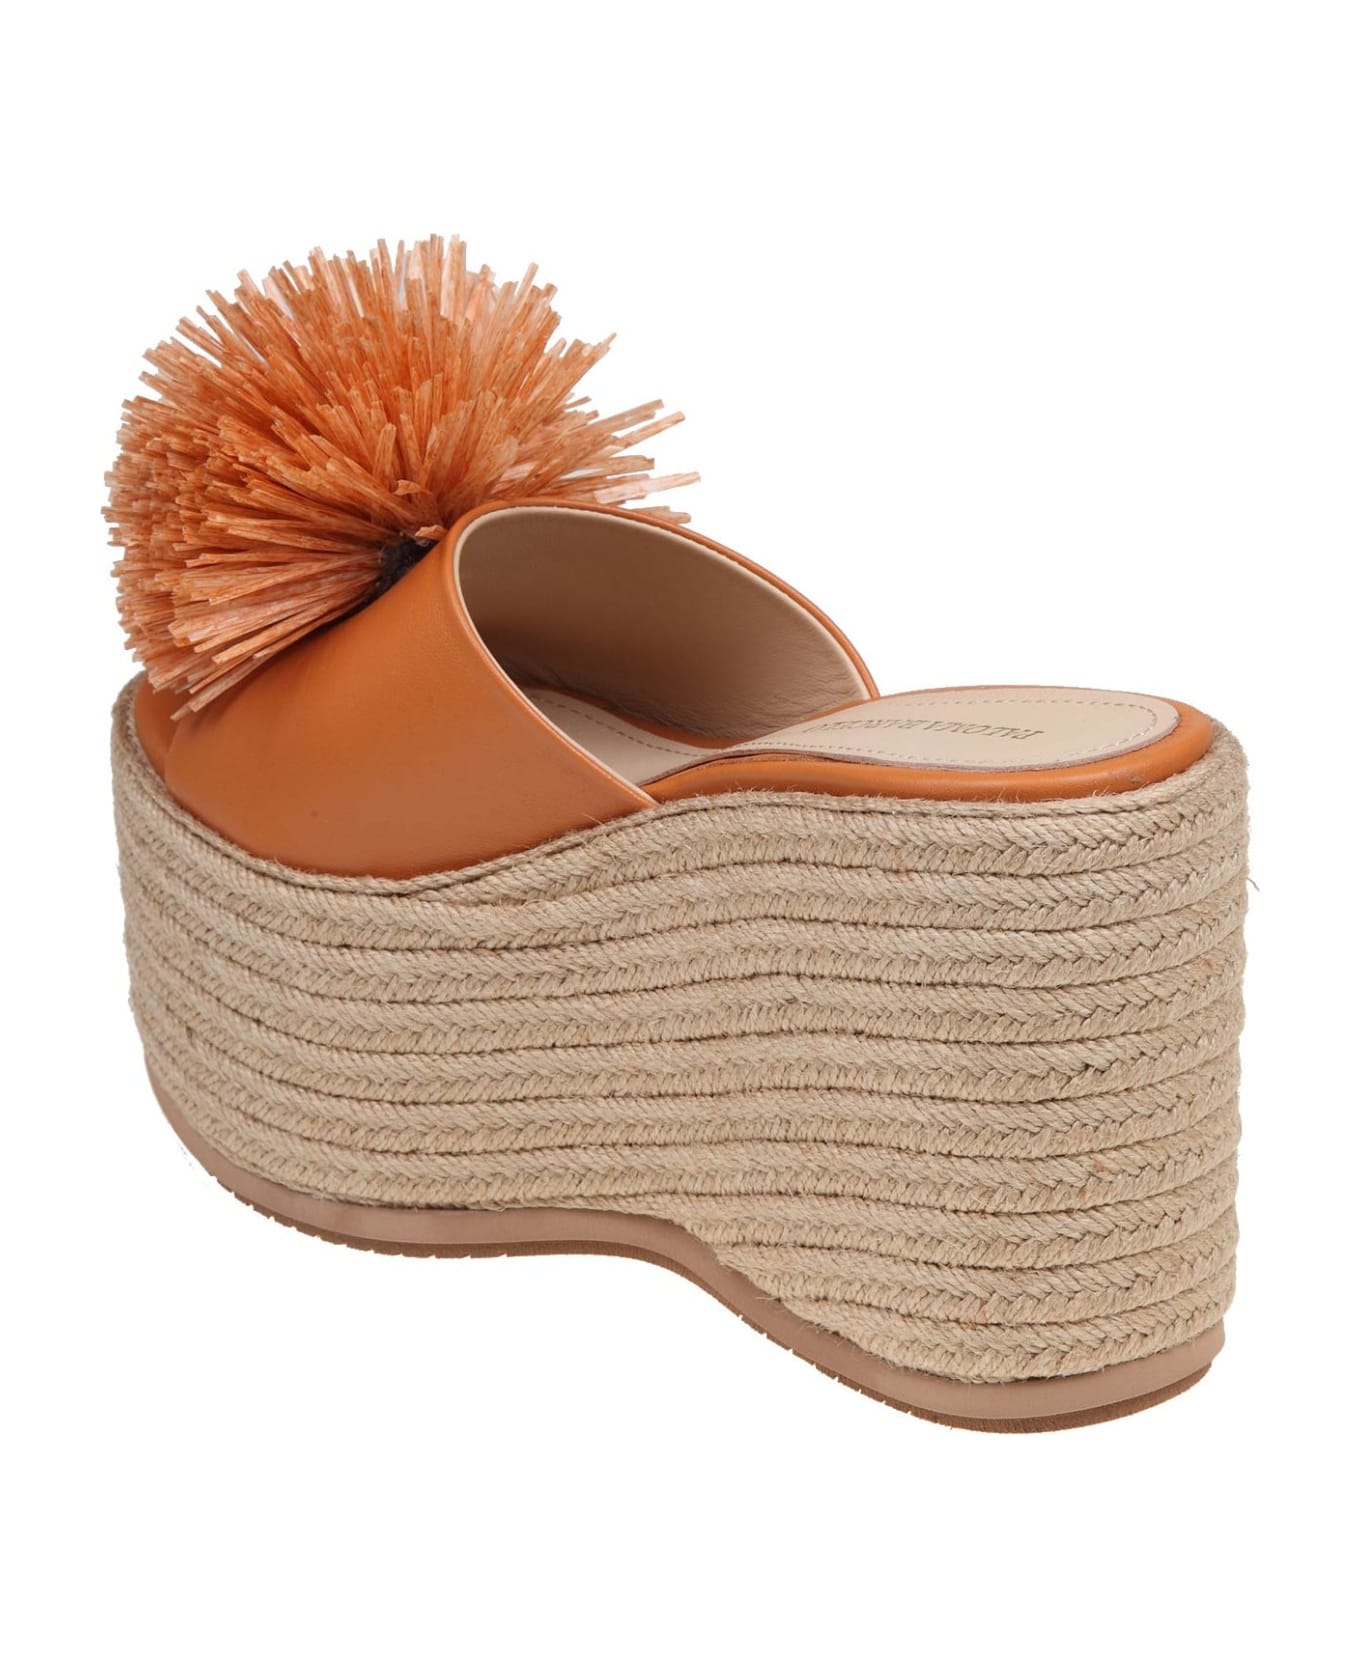 Paloma Barceló Lala Mules In Ocher Color Leather サンダル